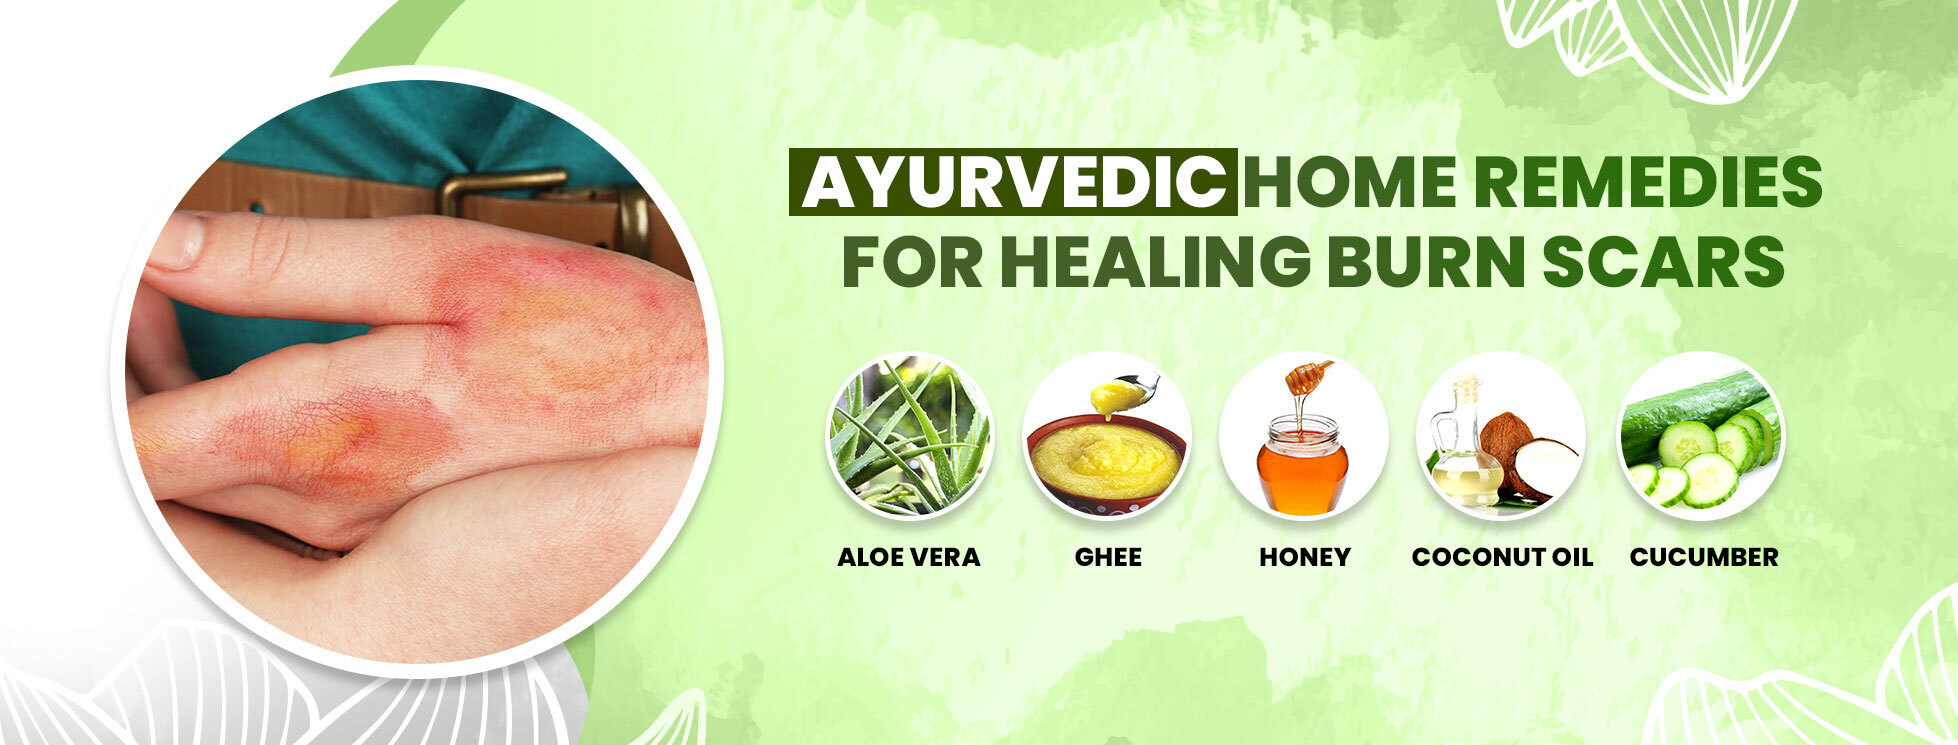 10 Ayurvedic Home Remedies for Healing Burn Scars: A Comprehensive Guide